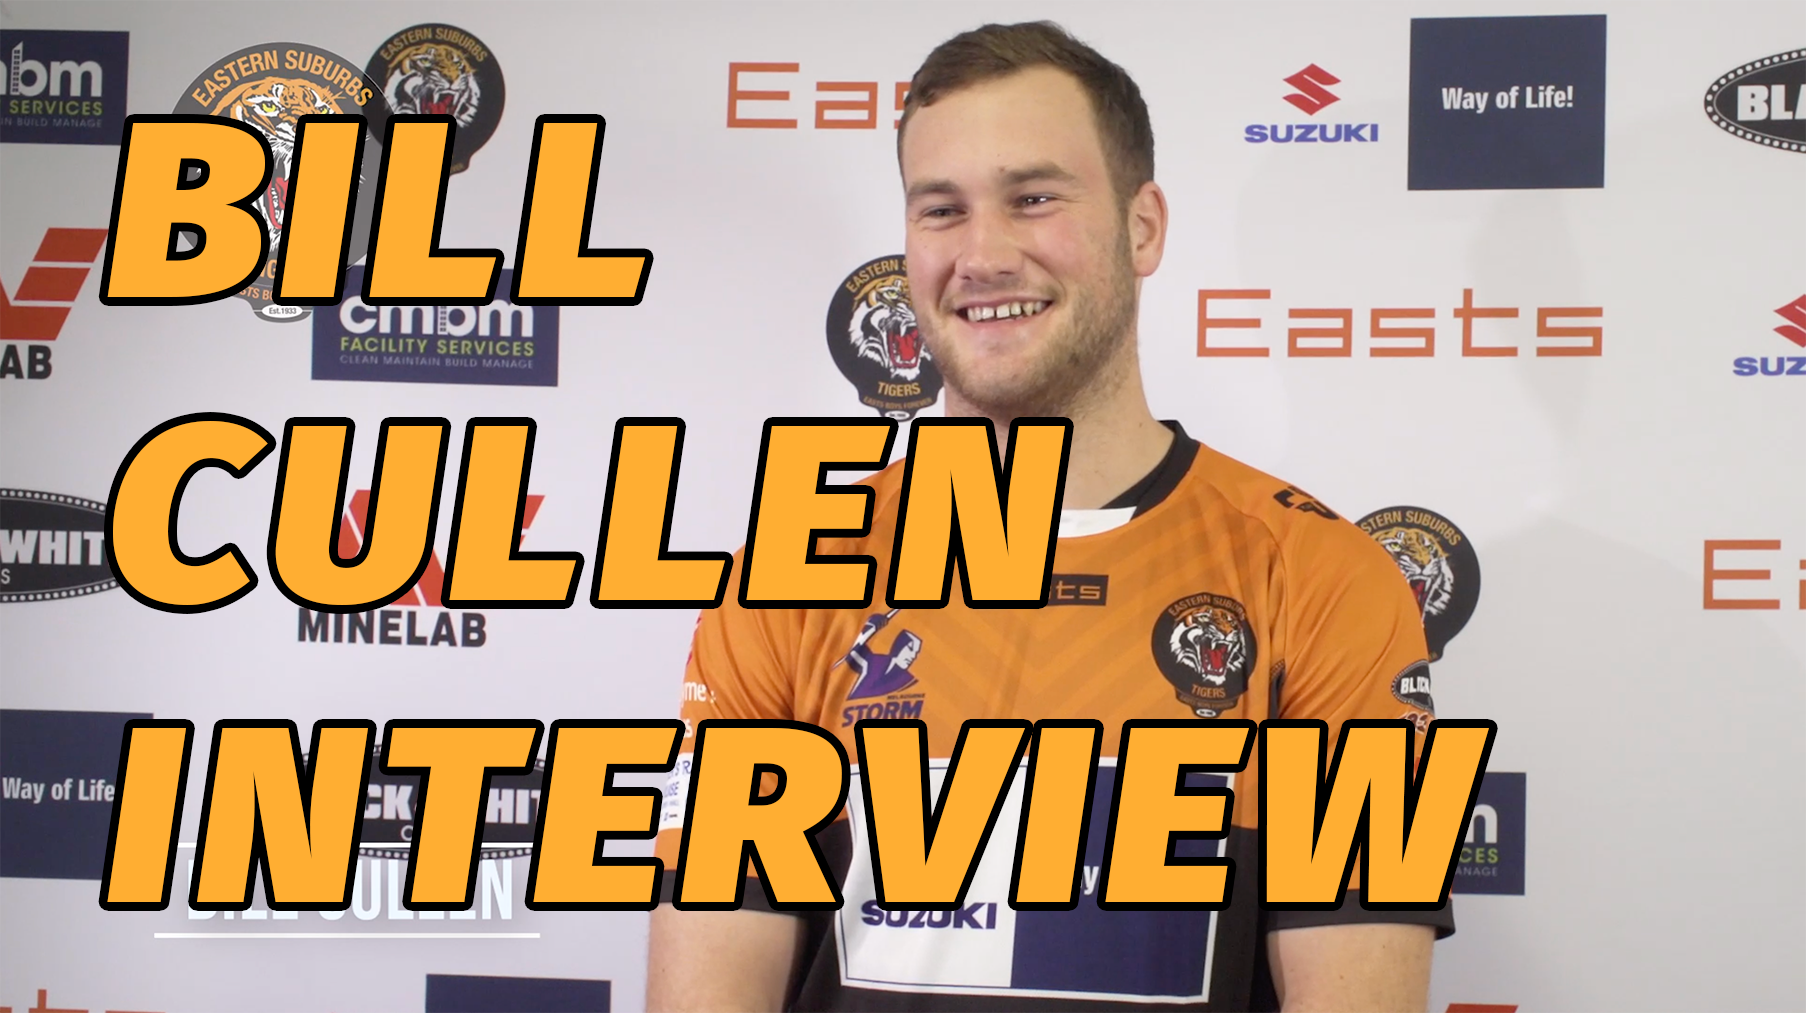 [BILL CULLEN INTERVIEW] Bill dropped by TigerTV to talk about his inspirations, what he thinks of the club, and more. #Funny #BillCullen #GoTheTigers #Season2019 #EBF #ORANGEandBLACK